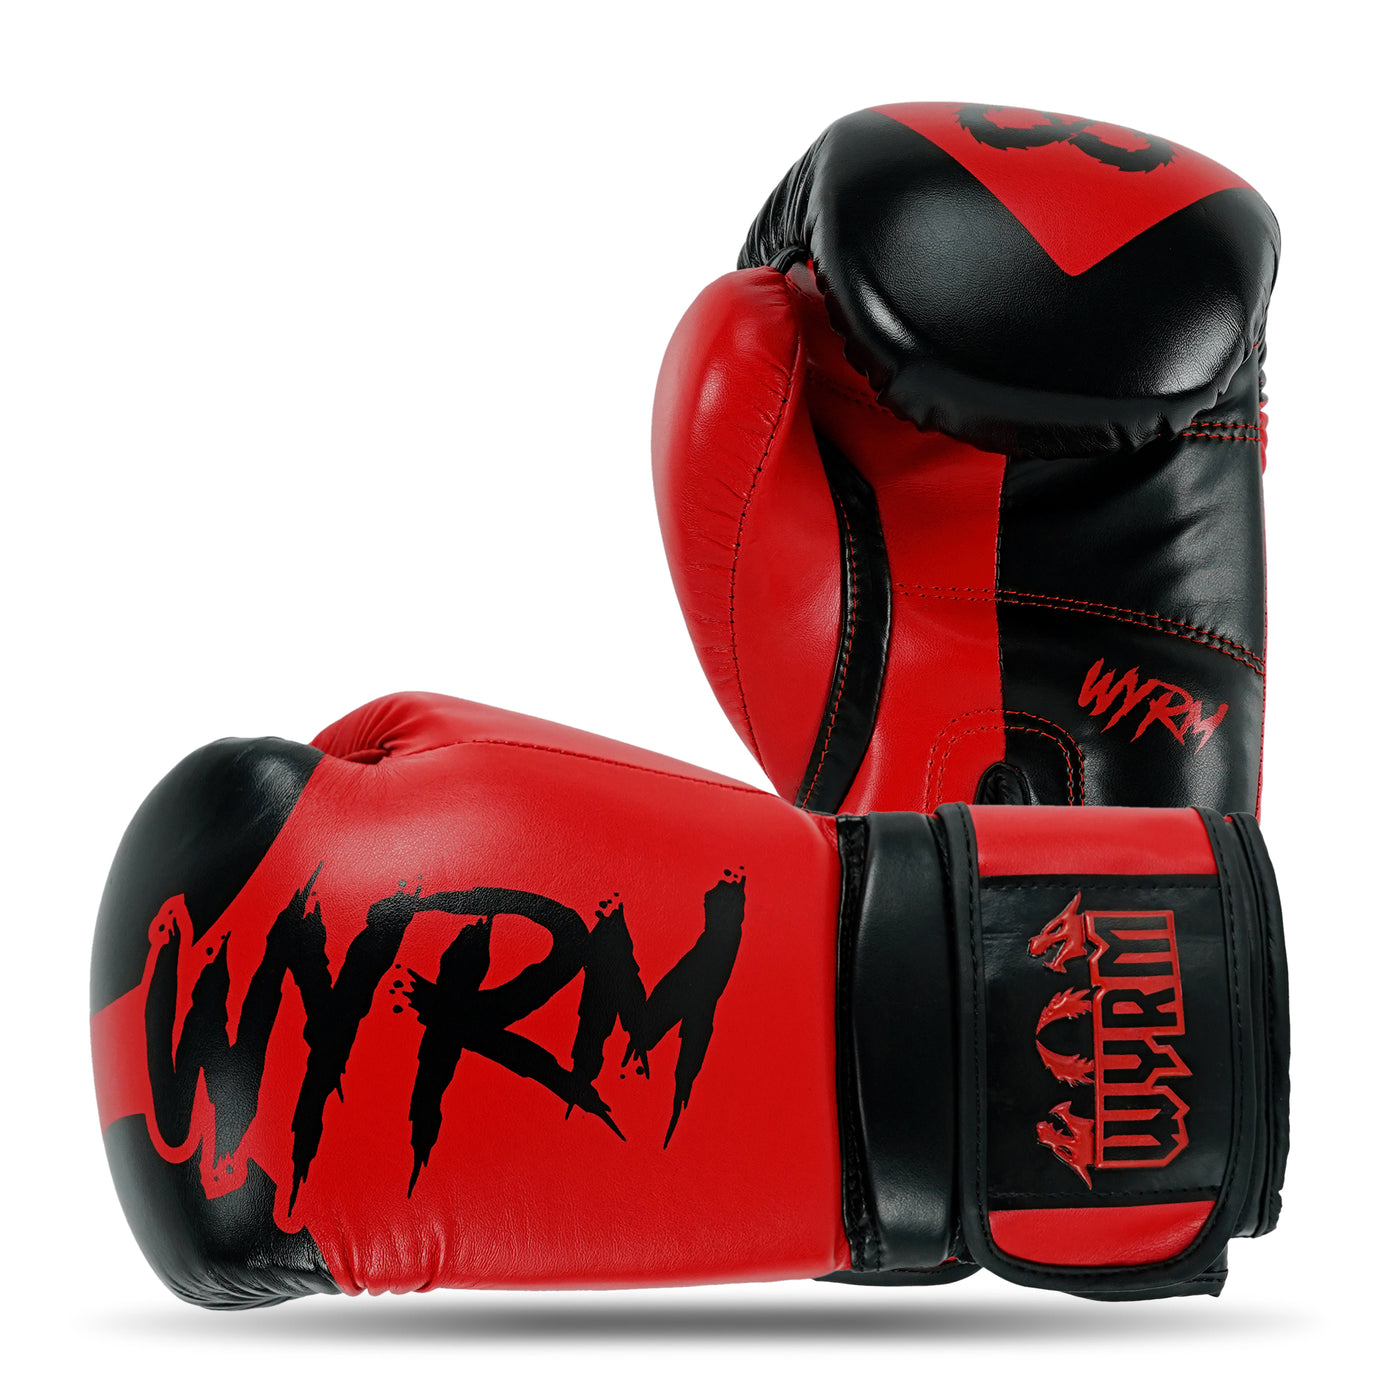 Matador Red/Black Leather Boxing Gloves